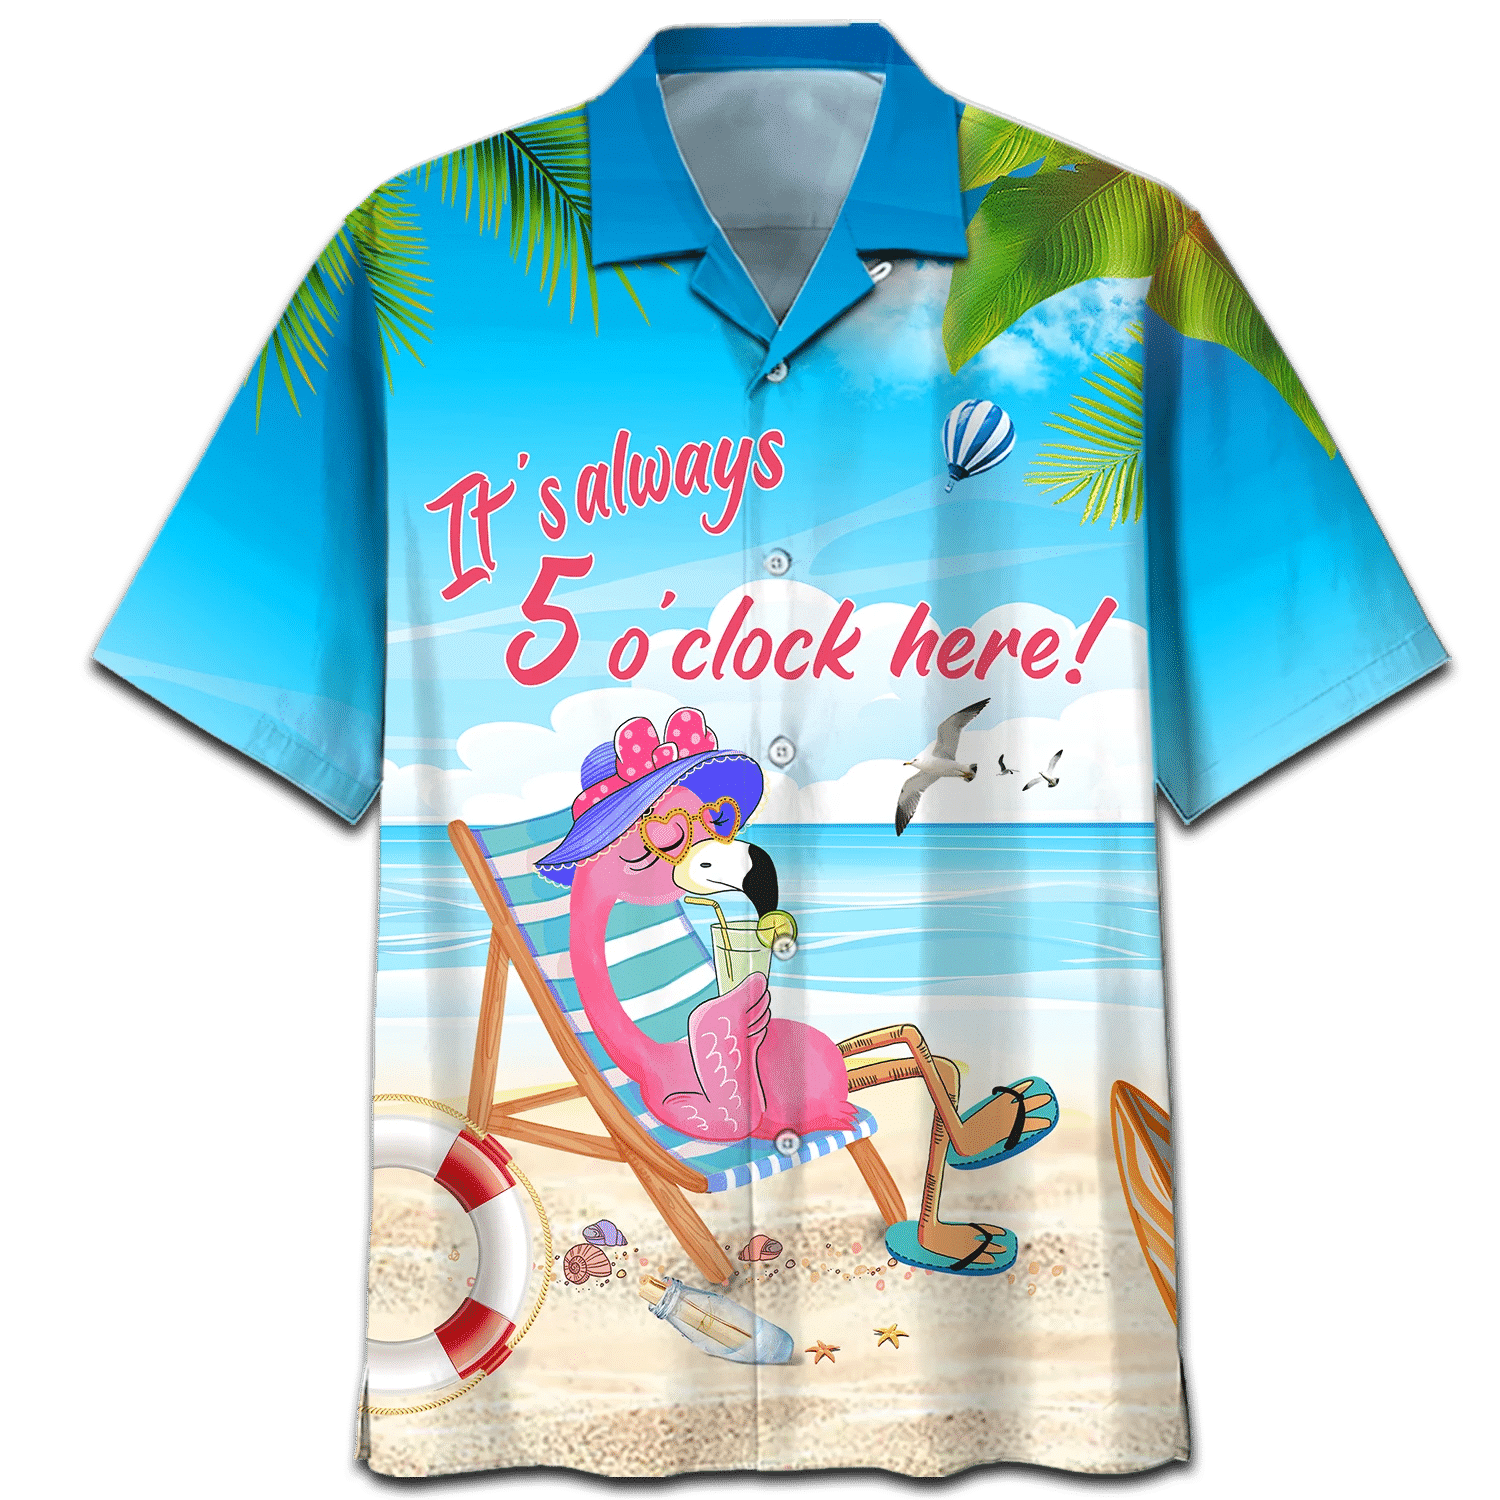 Discover many styles of Hawaiian shirts on the market in 2022 39